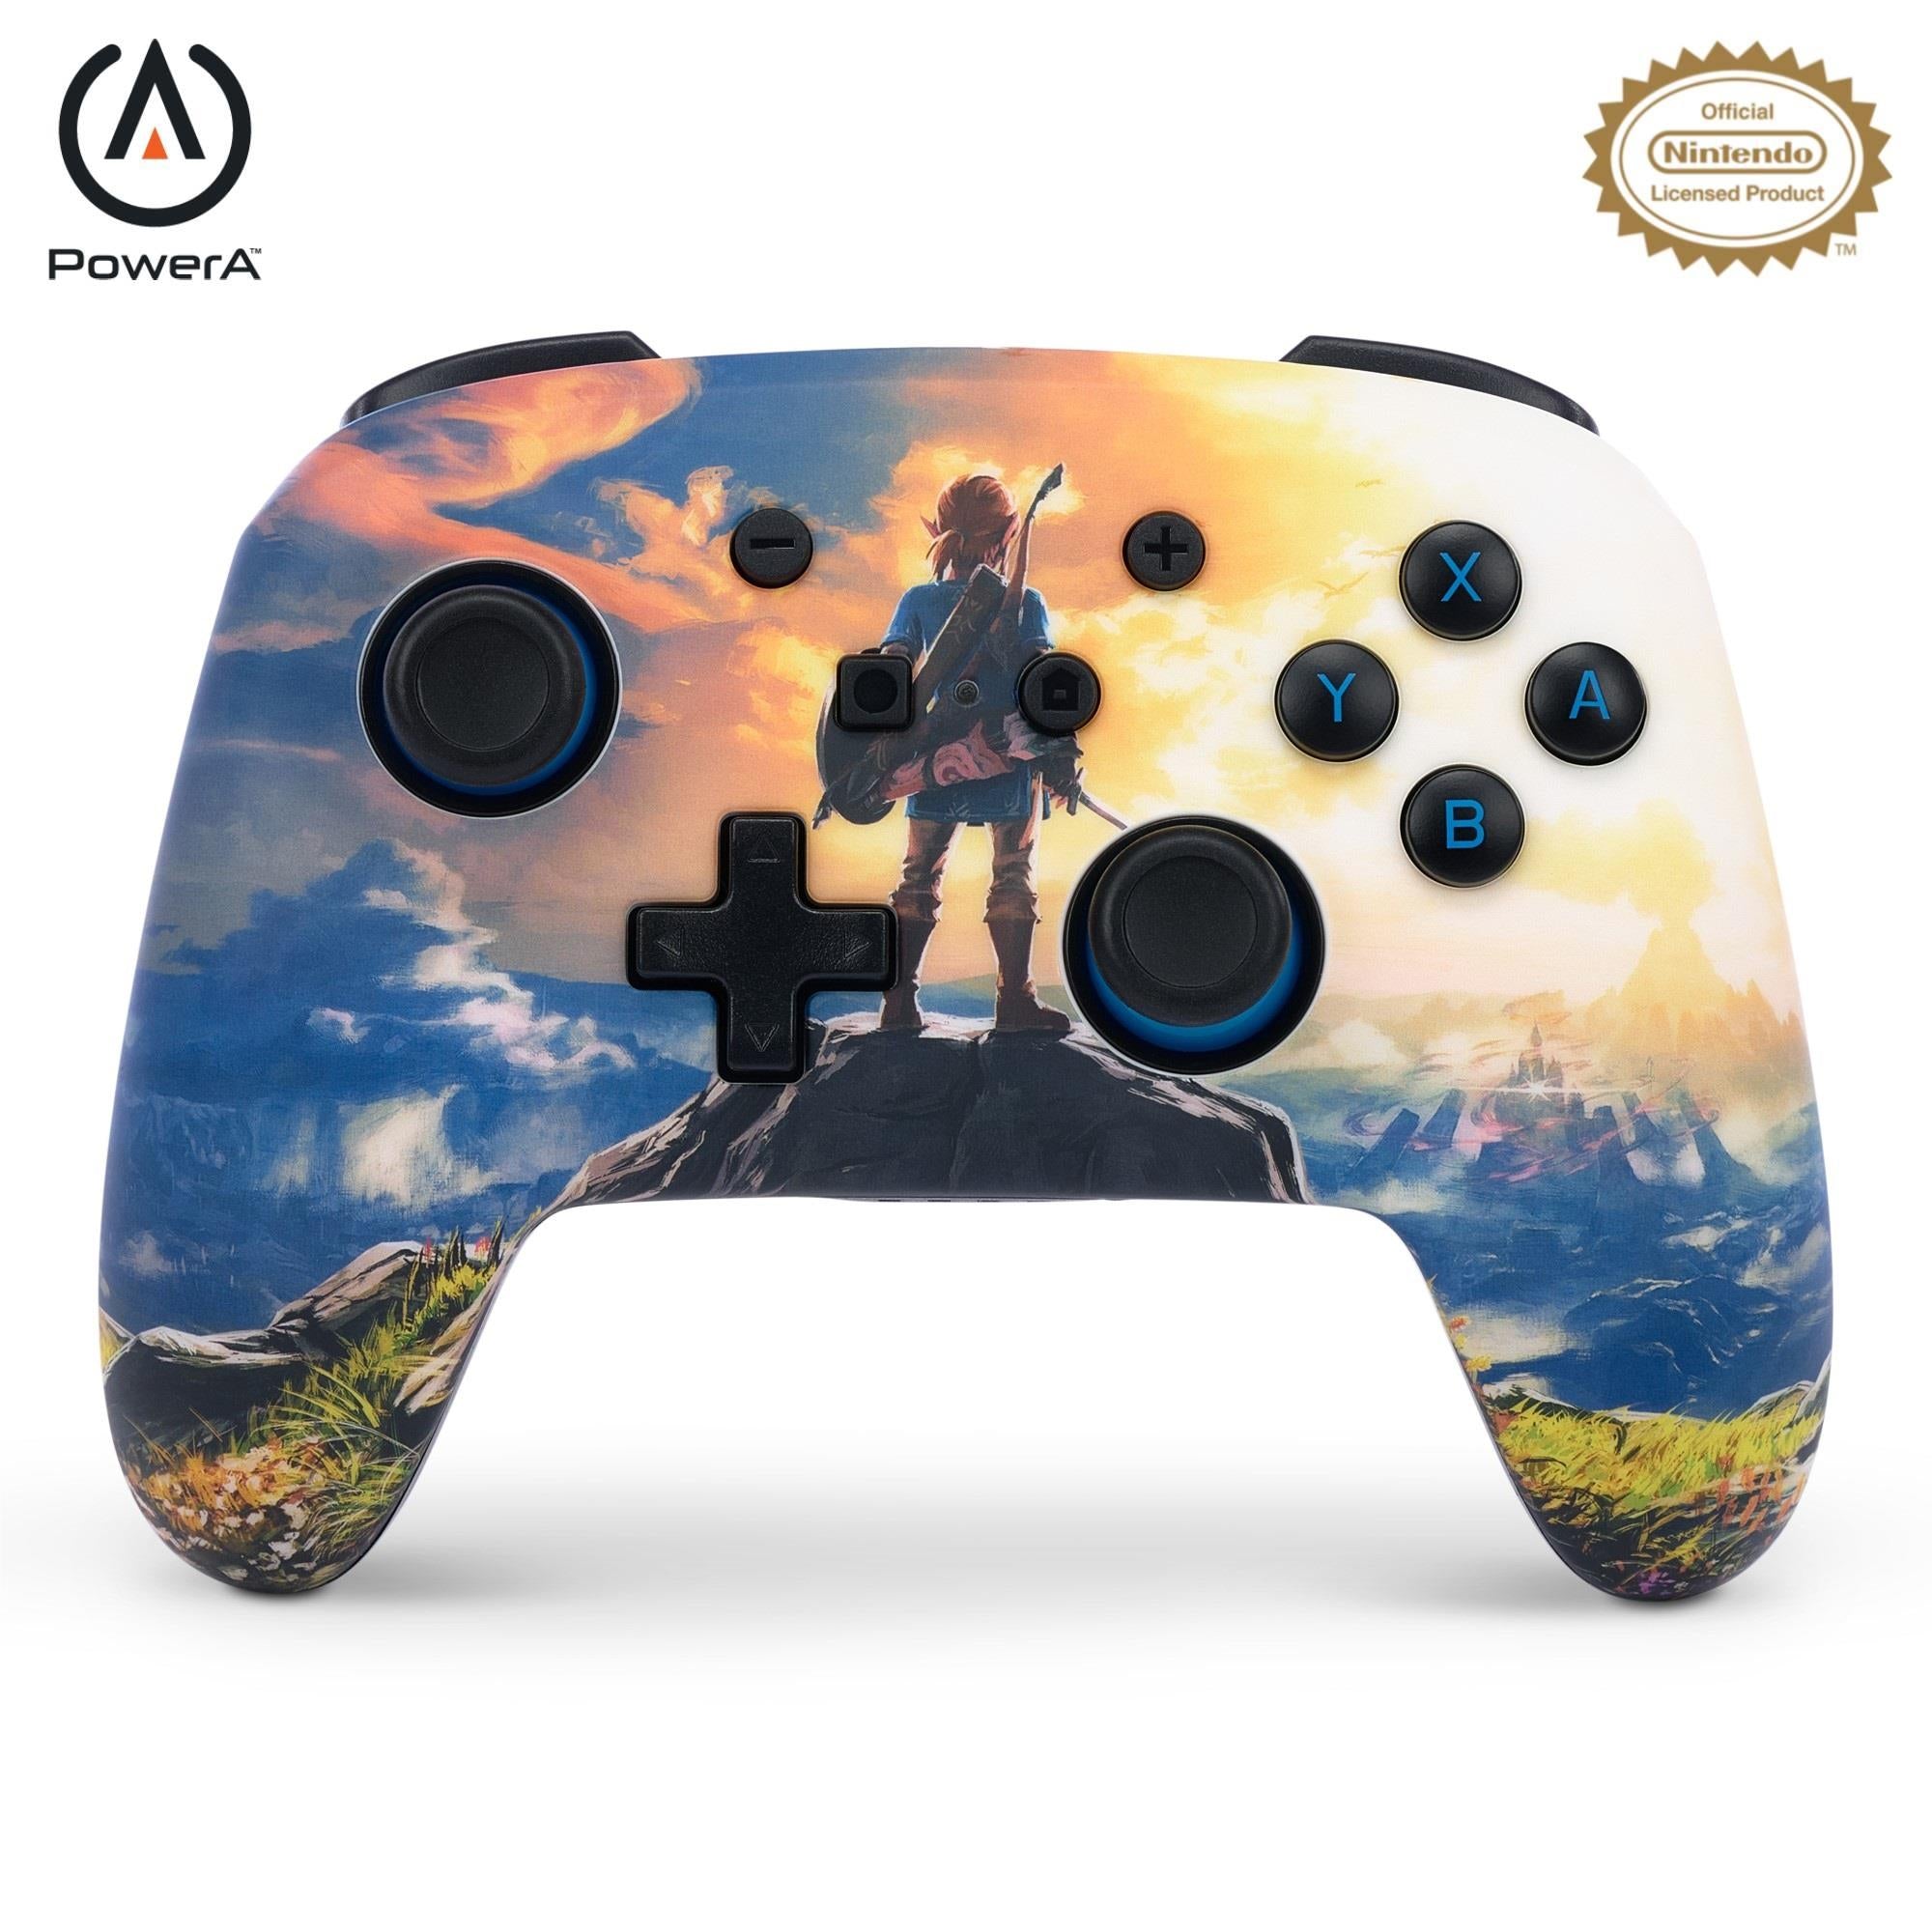 PowerA Enhanced Wireless Controller Rechargeable for Nintendo Switch, Nintendo Switch Wireless controllers. Officially licensed.